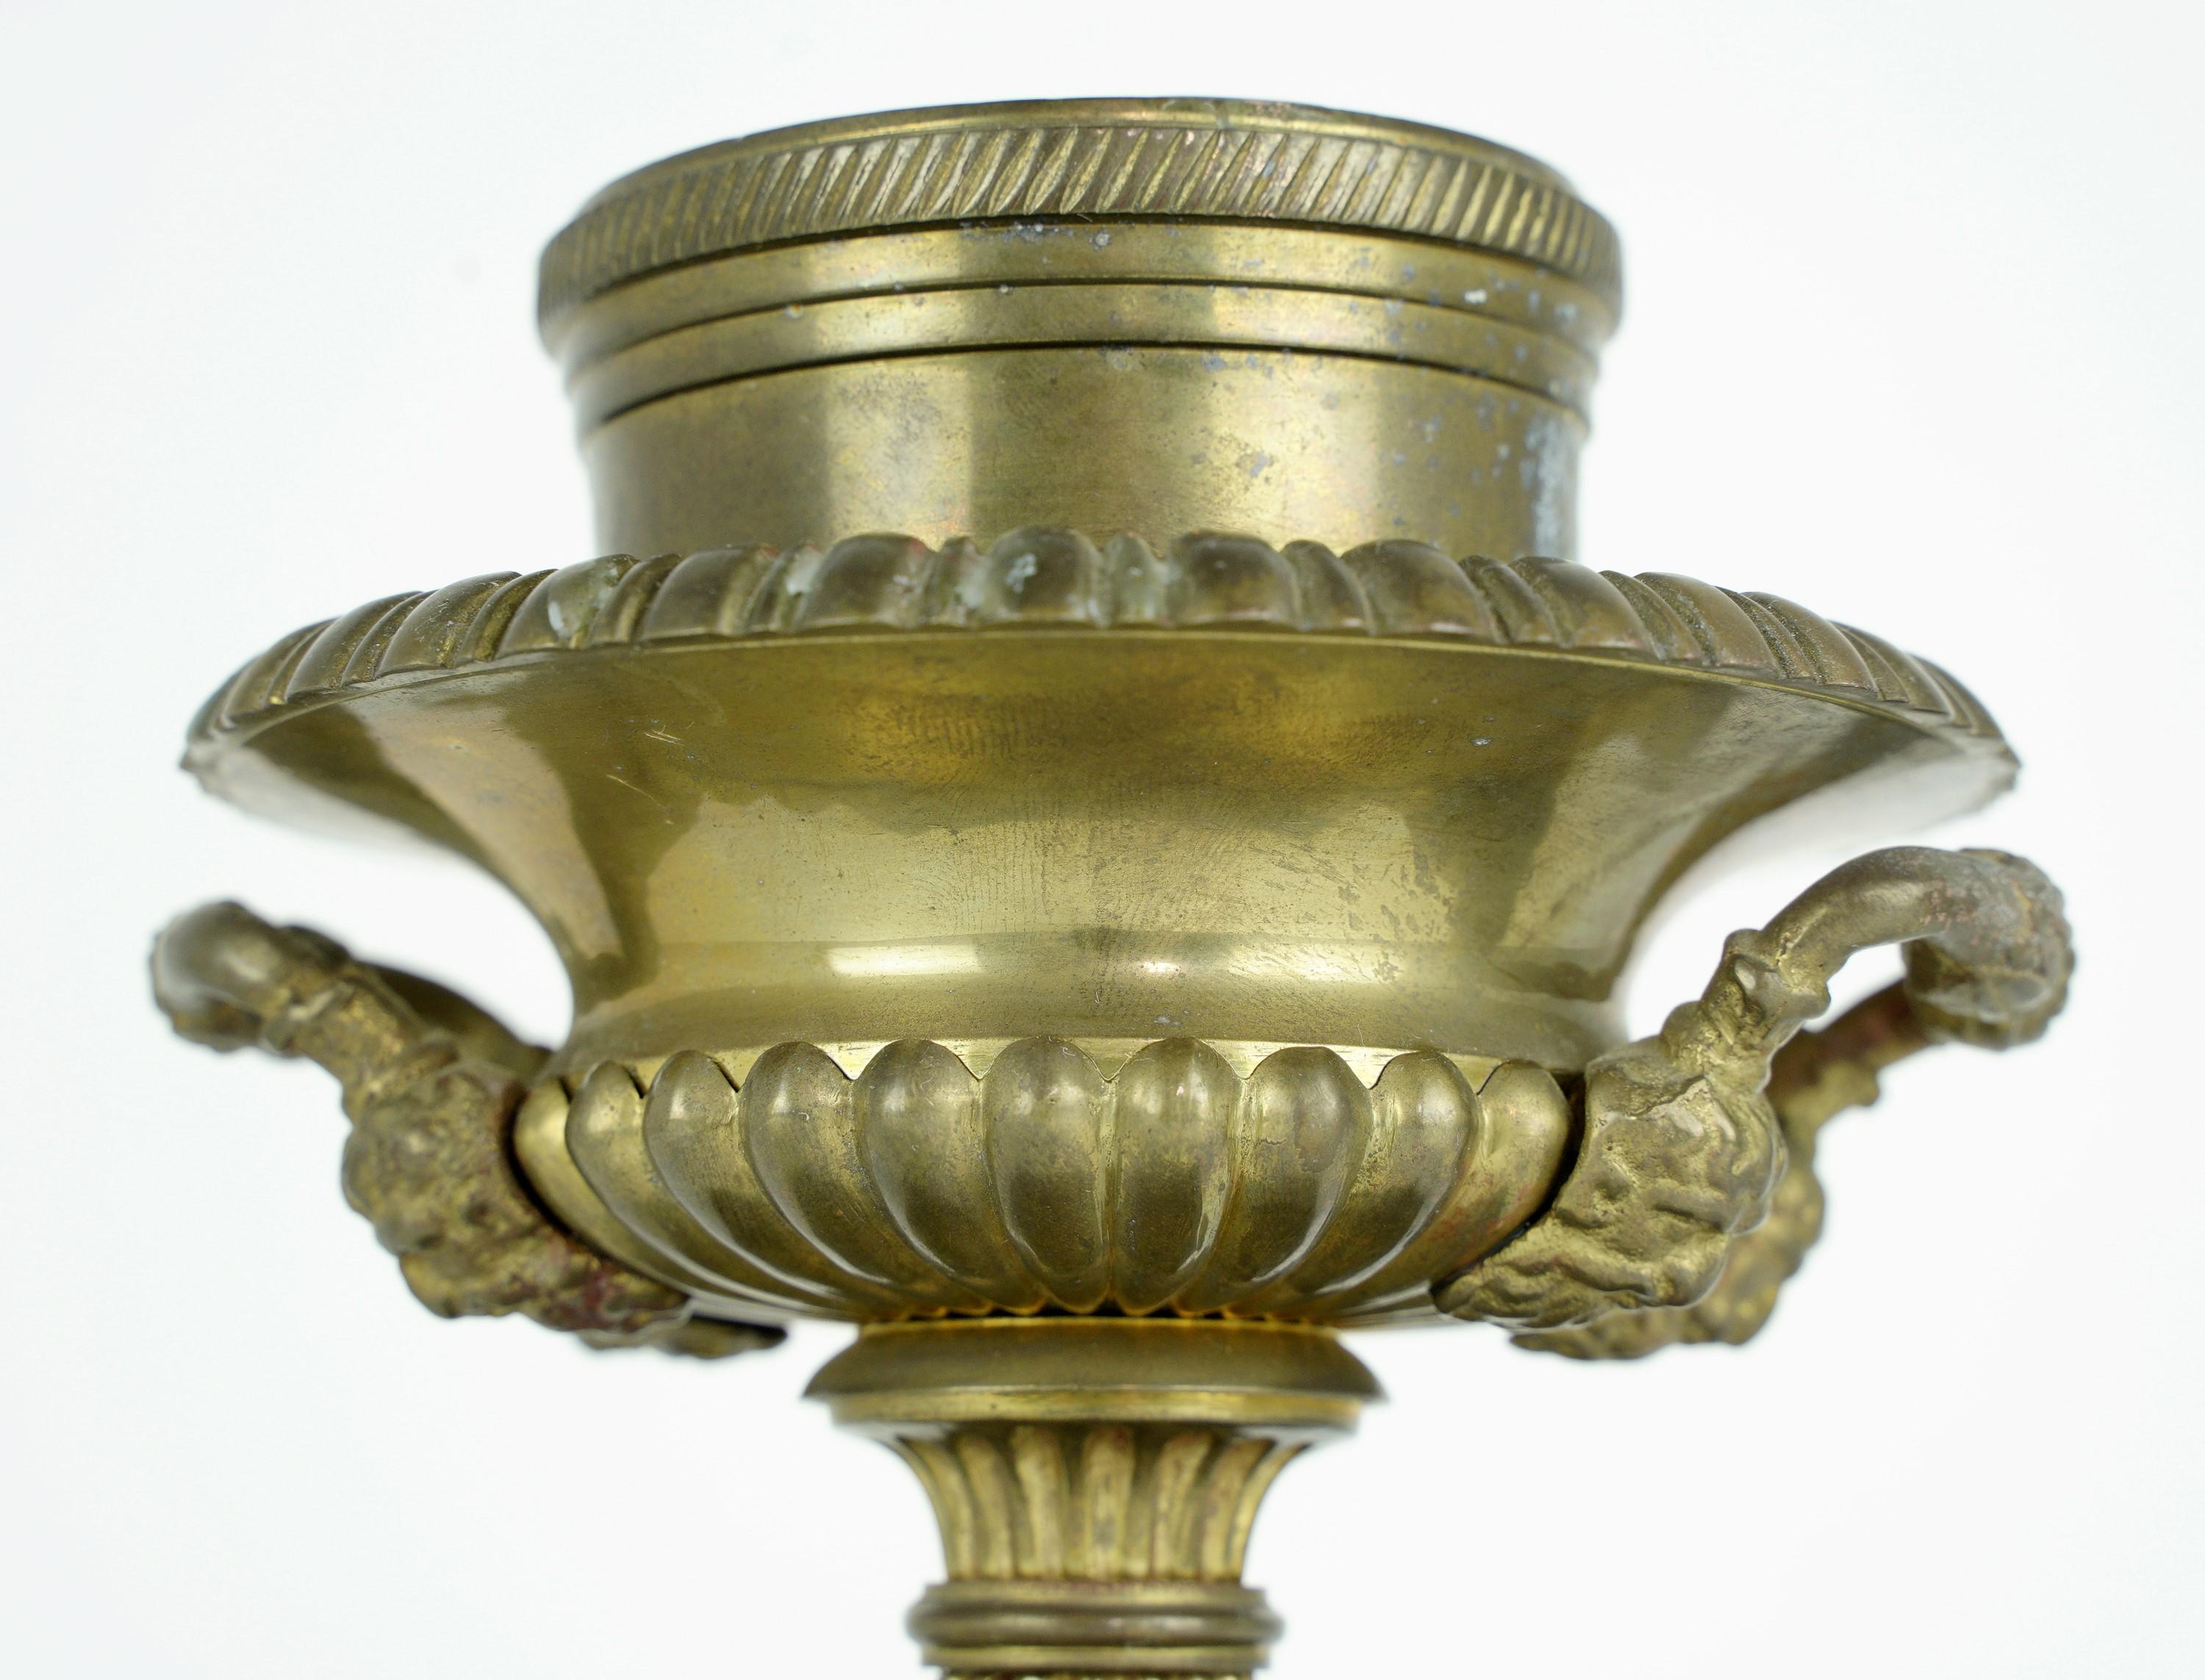 Solid brass candle holders with ornate details. Made by Mottahedeh. Marked Historic Charleston Reproductions underneath the bottom. Original patina. Sold as a pair. Please note, this item is located in our Scranton, PA location.